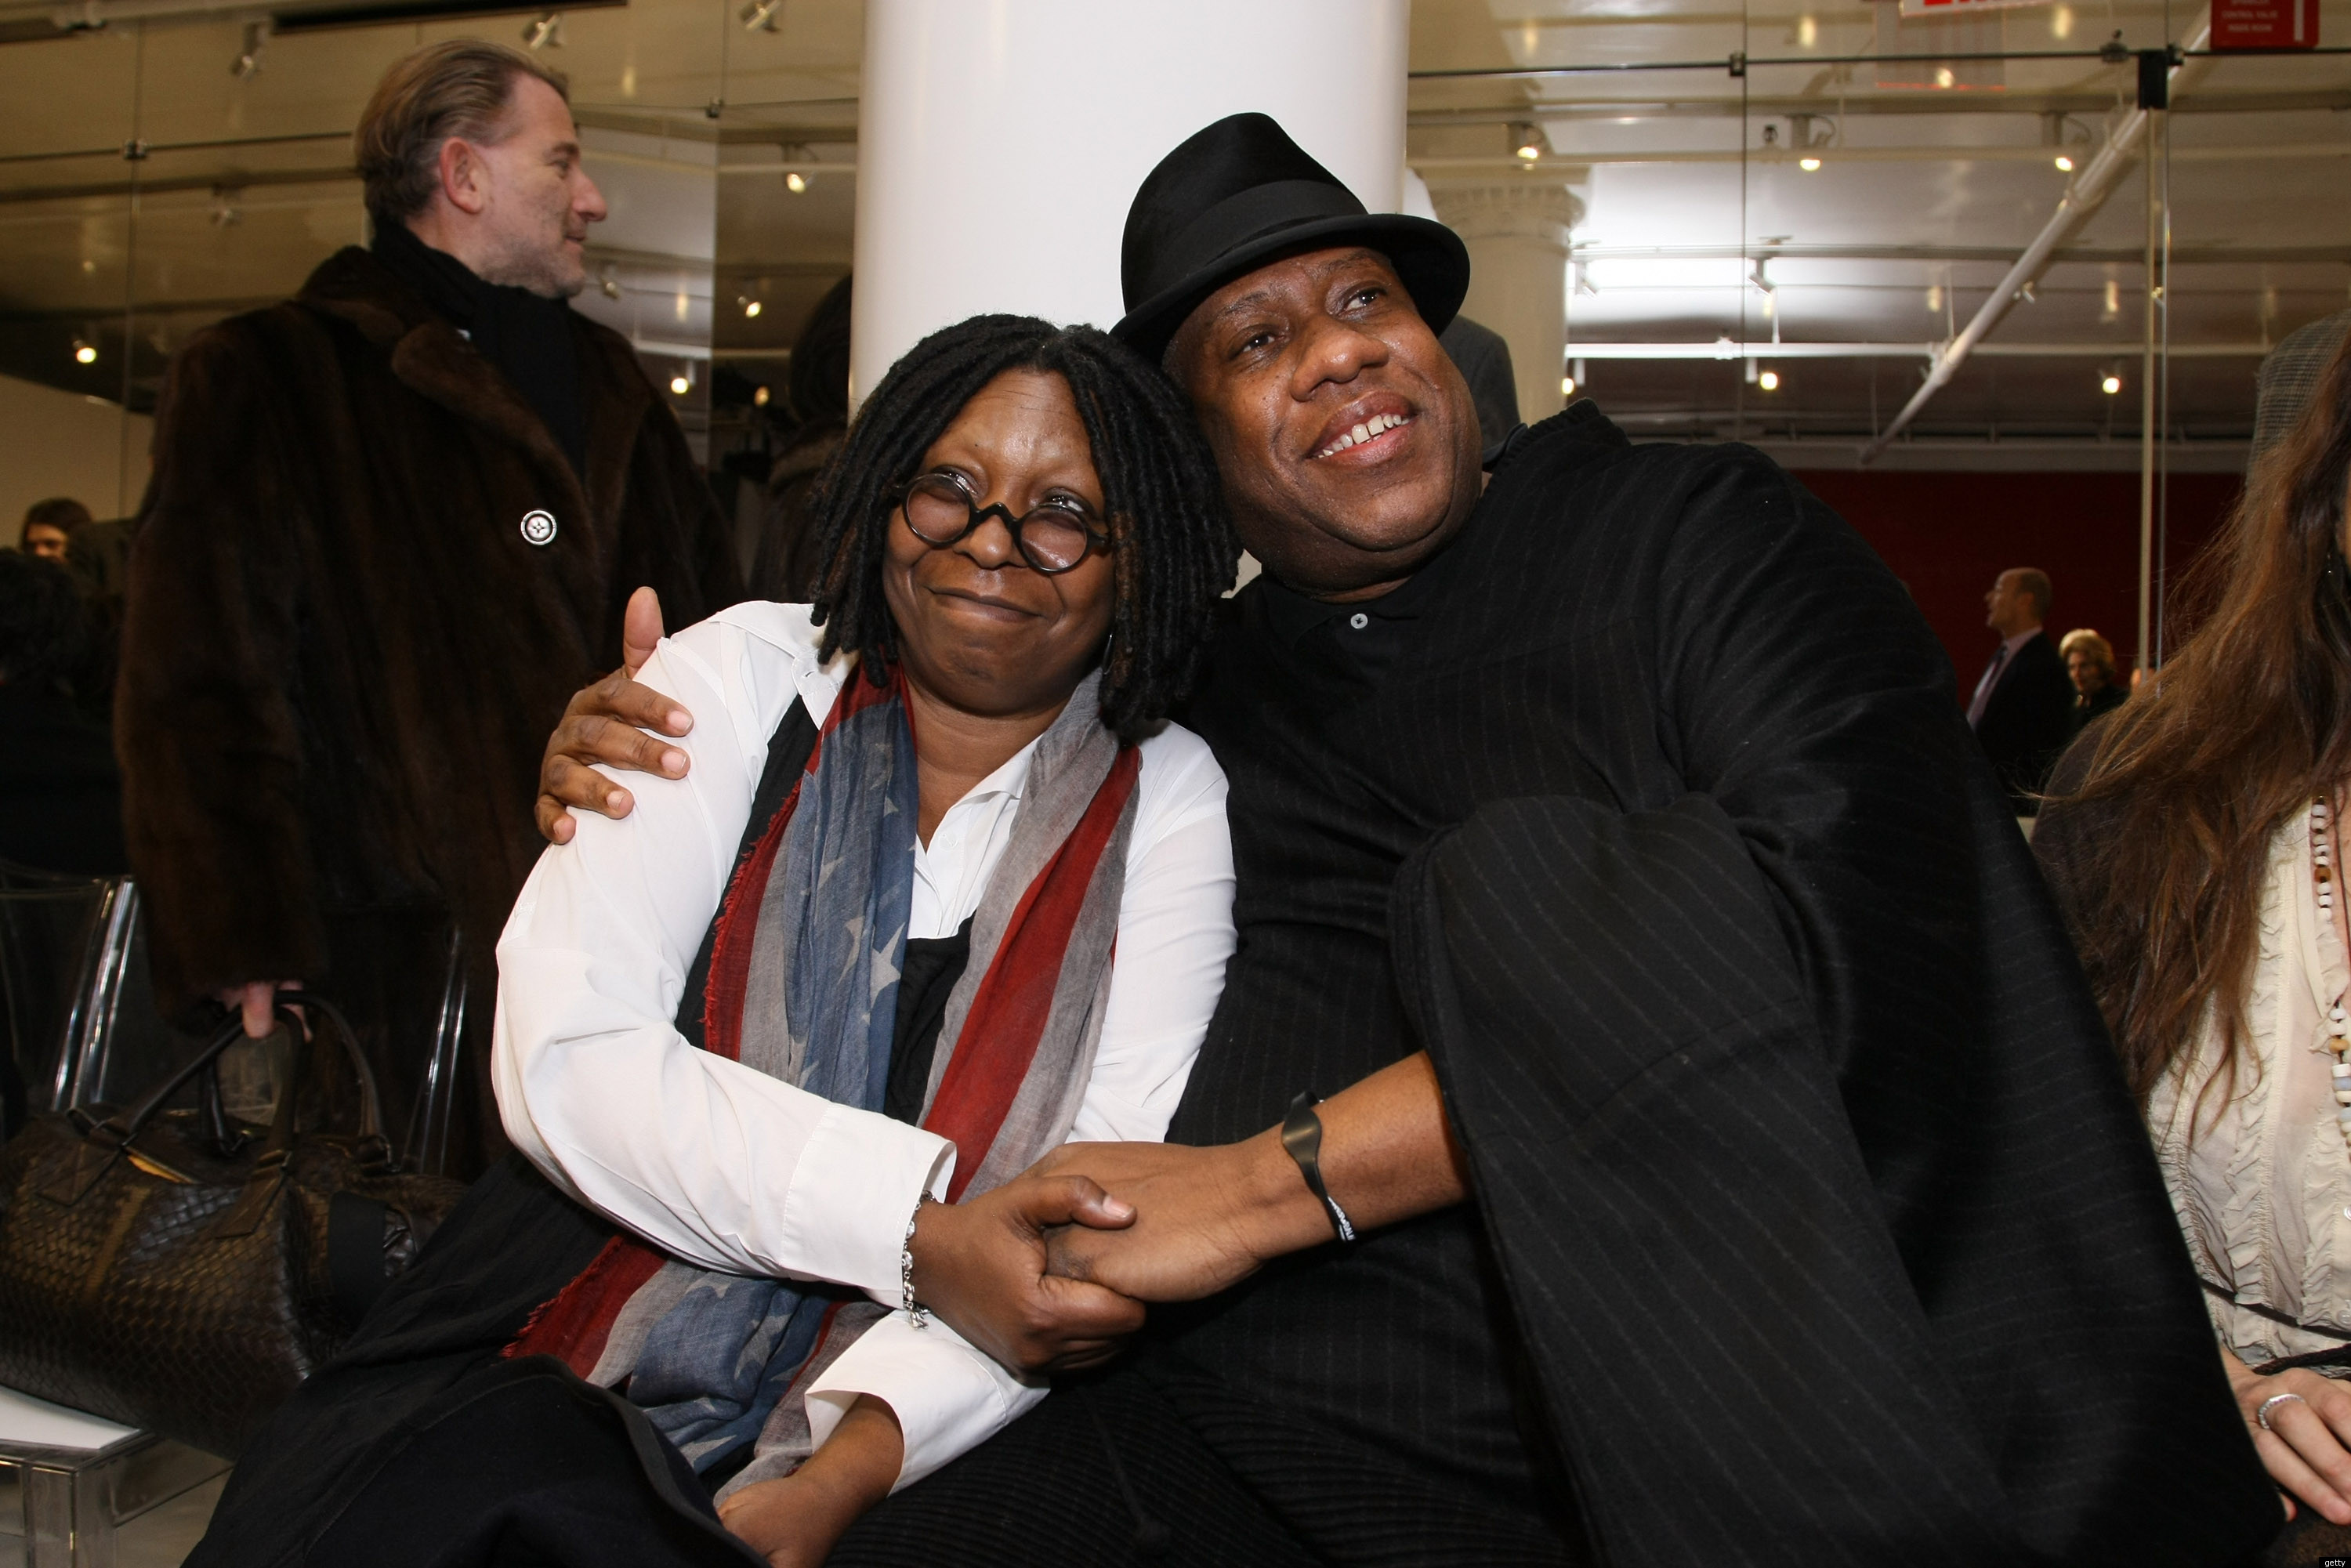 Michael Kors and André Leon Talley Hold Court Over The World of